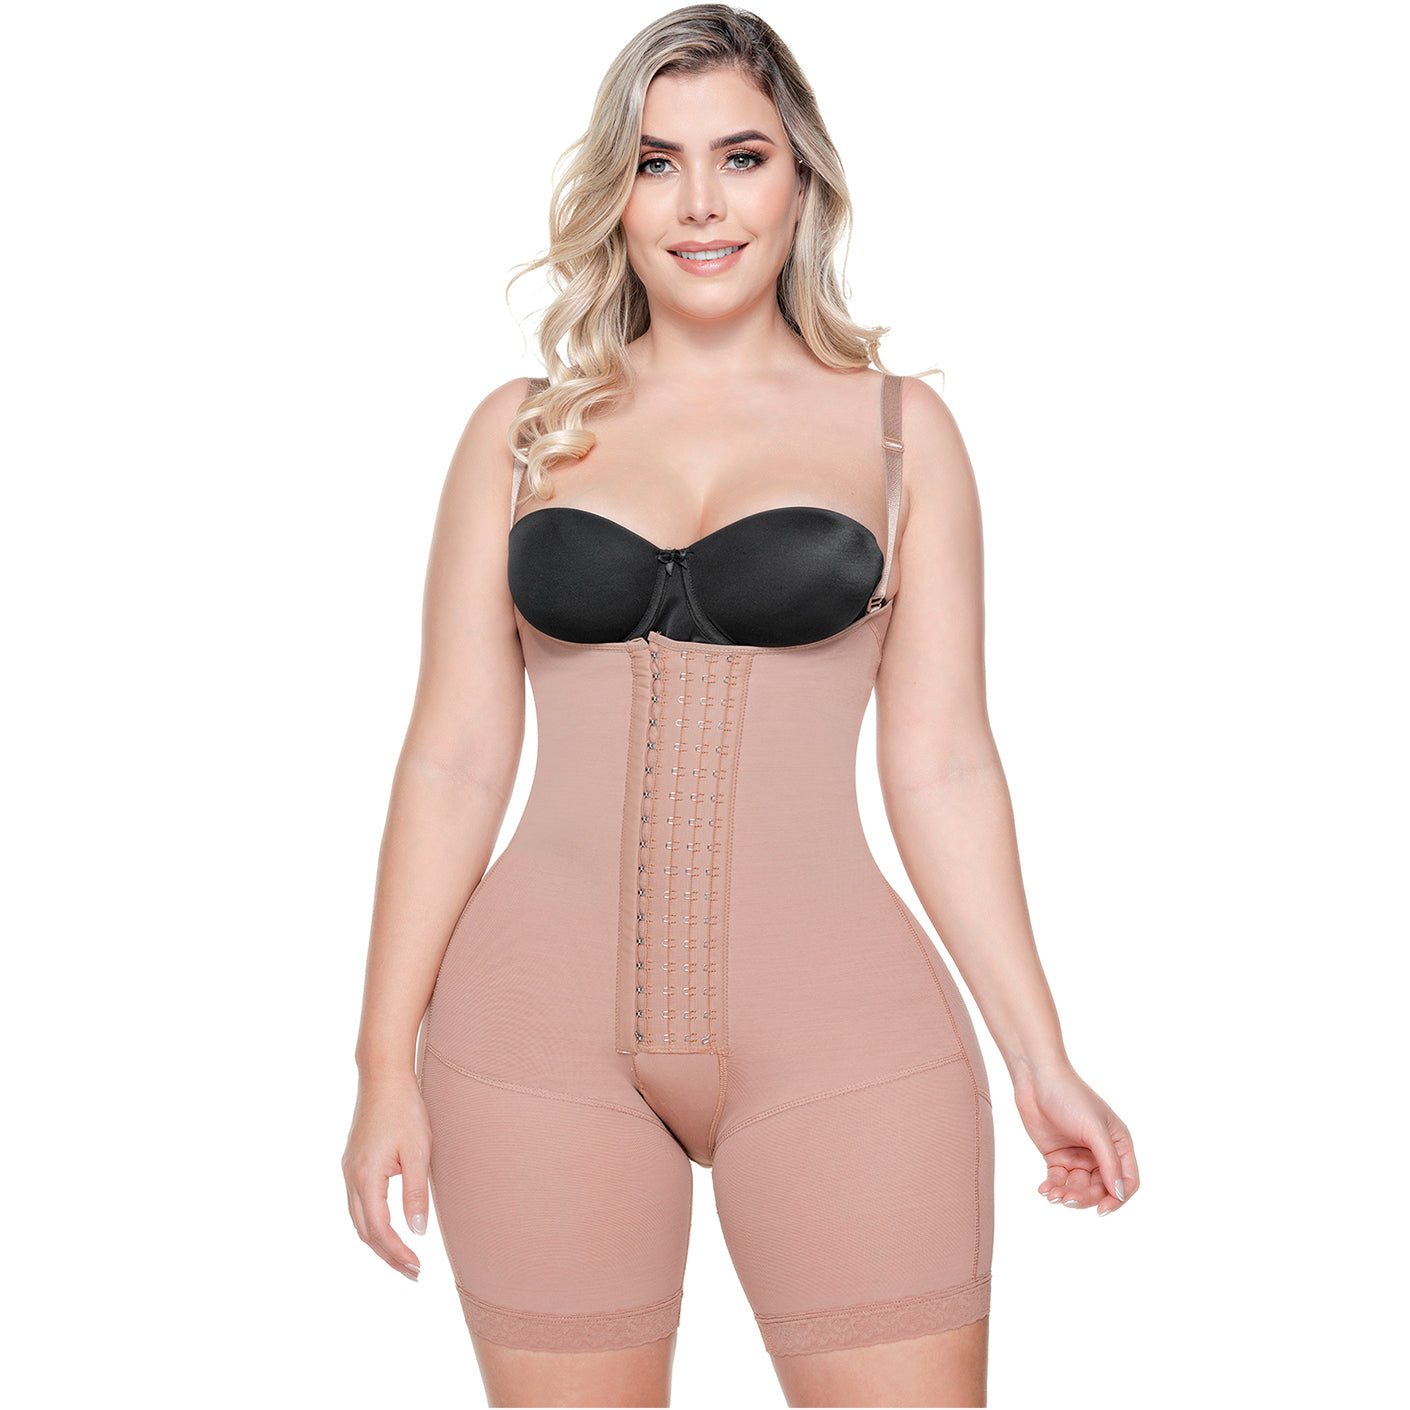 Daily Use Shapewear Medium compression Open bust removable straps